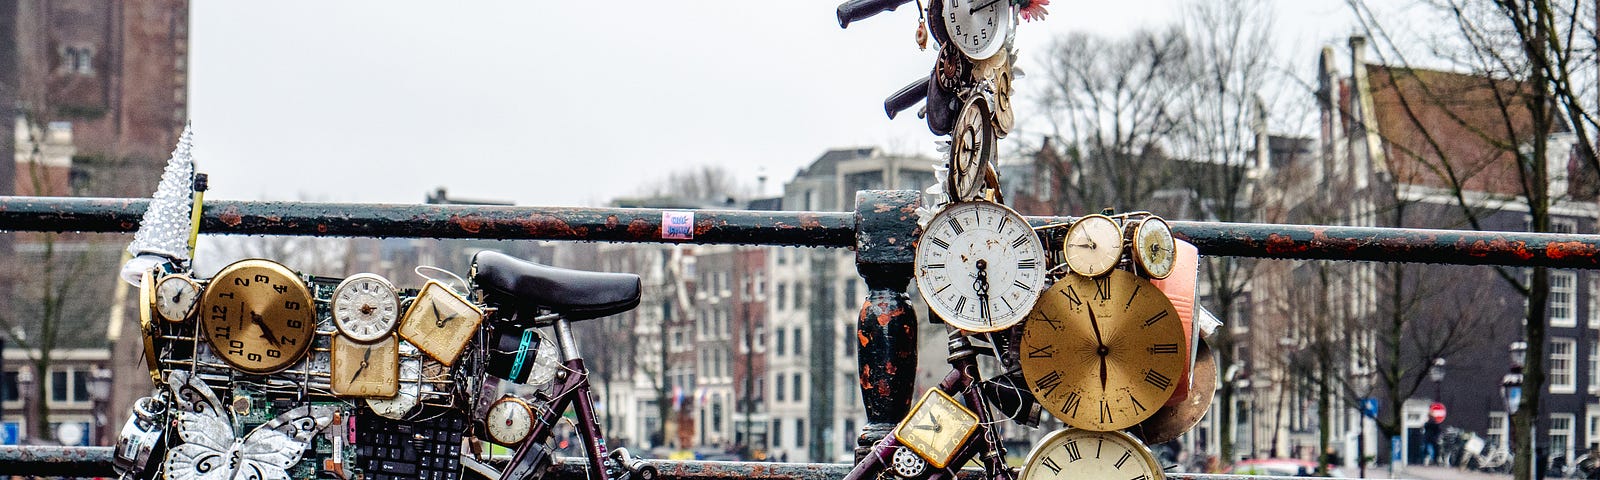 Bicycle covered with clocks, parked on a low bridge over a canal